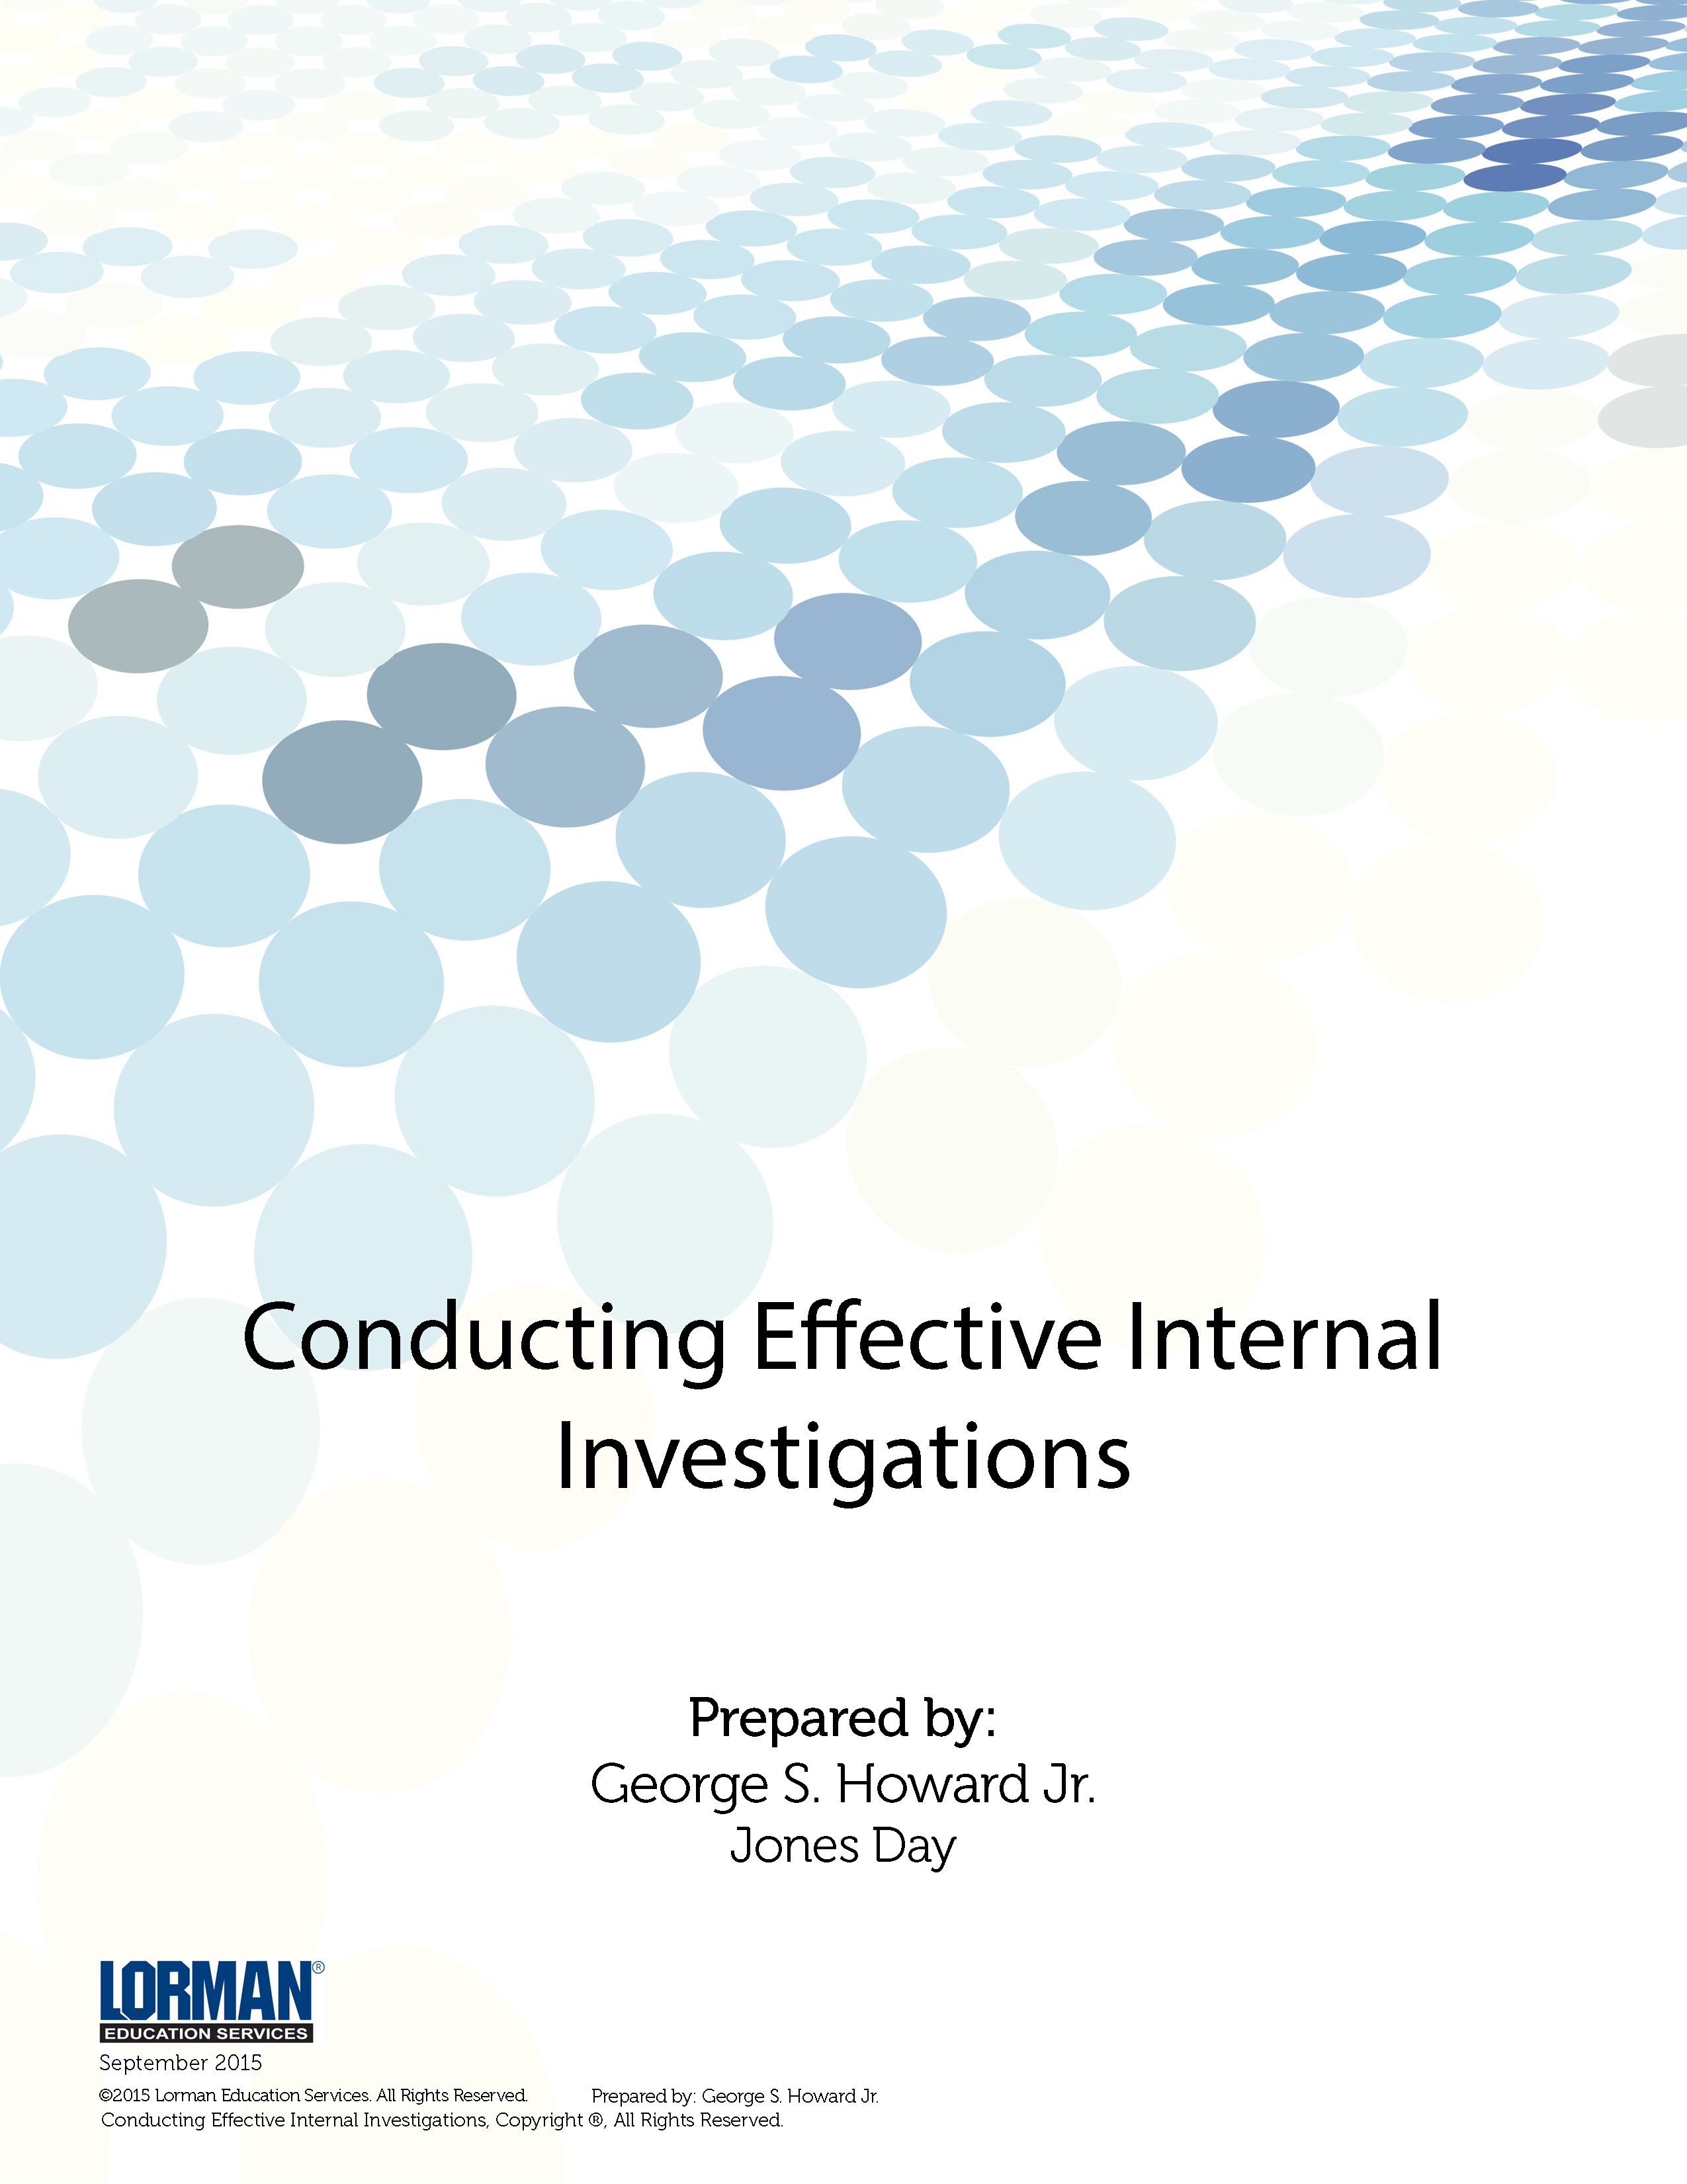 Conducting Effective Internal Investigations